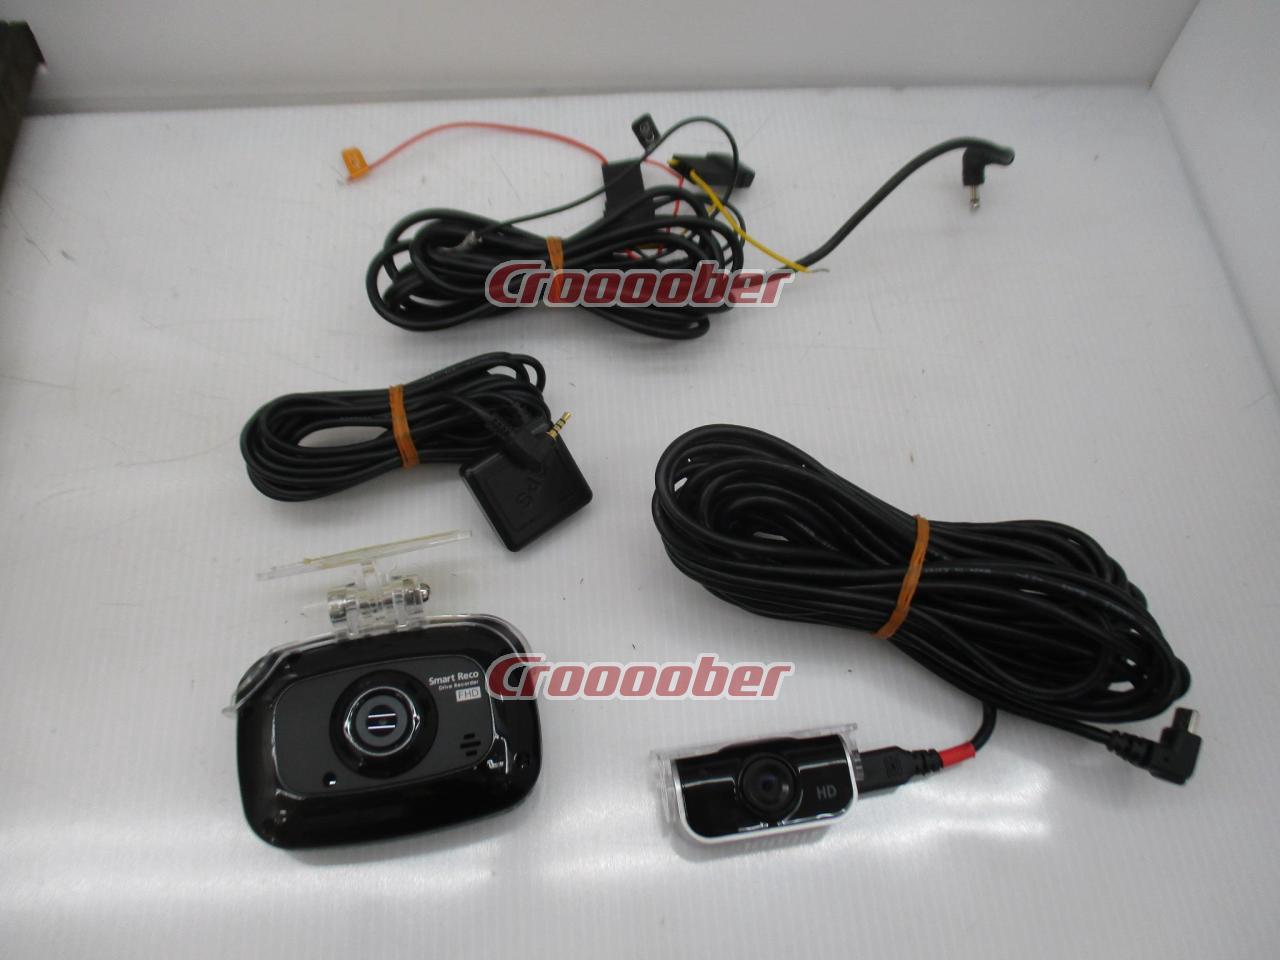 Smart Reco WHSR-510 Two Front And Rear Camera | Drive Recorder 